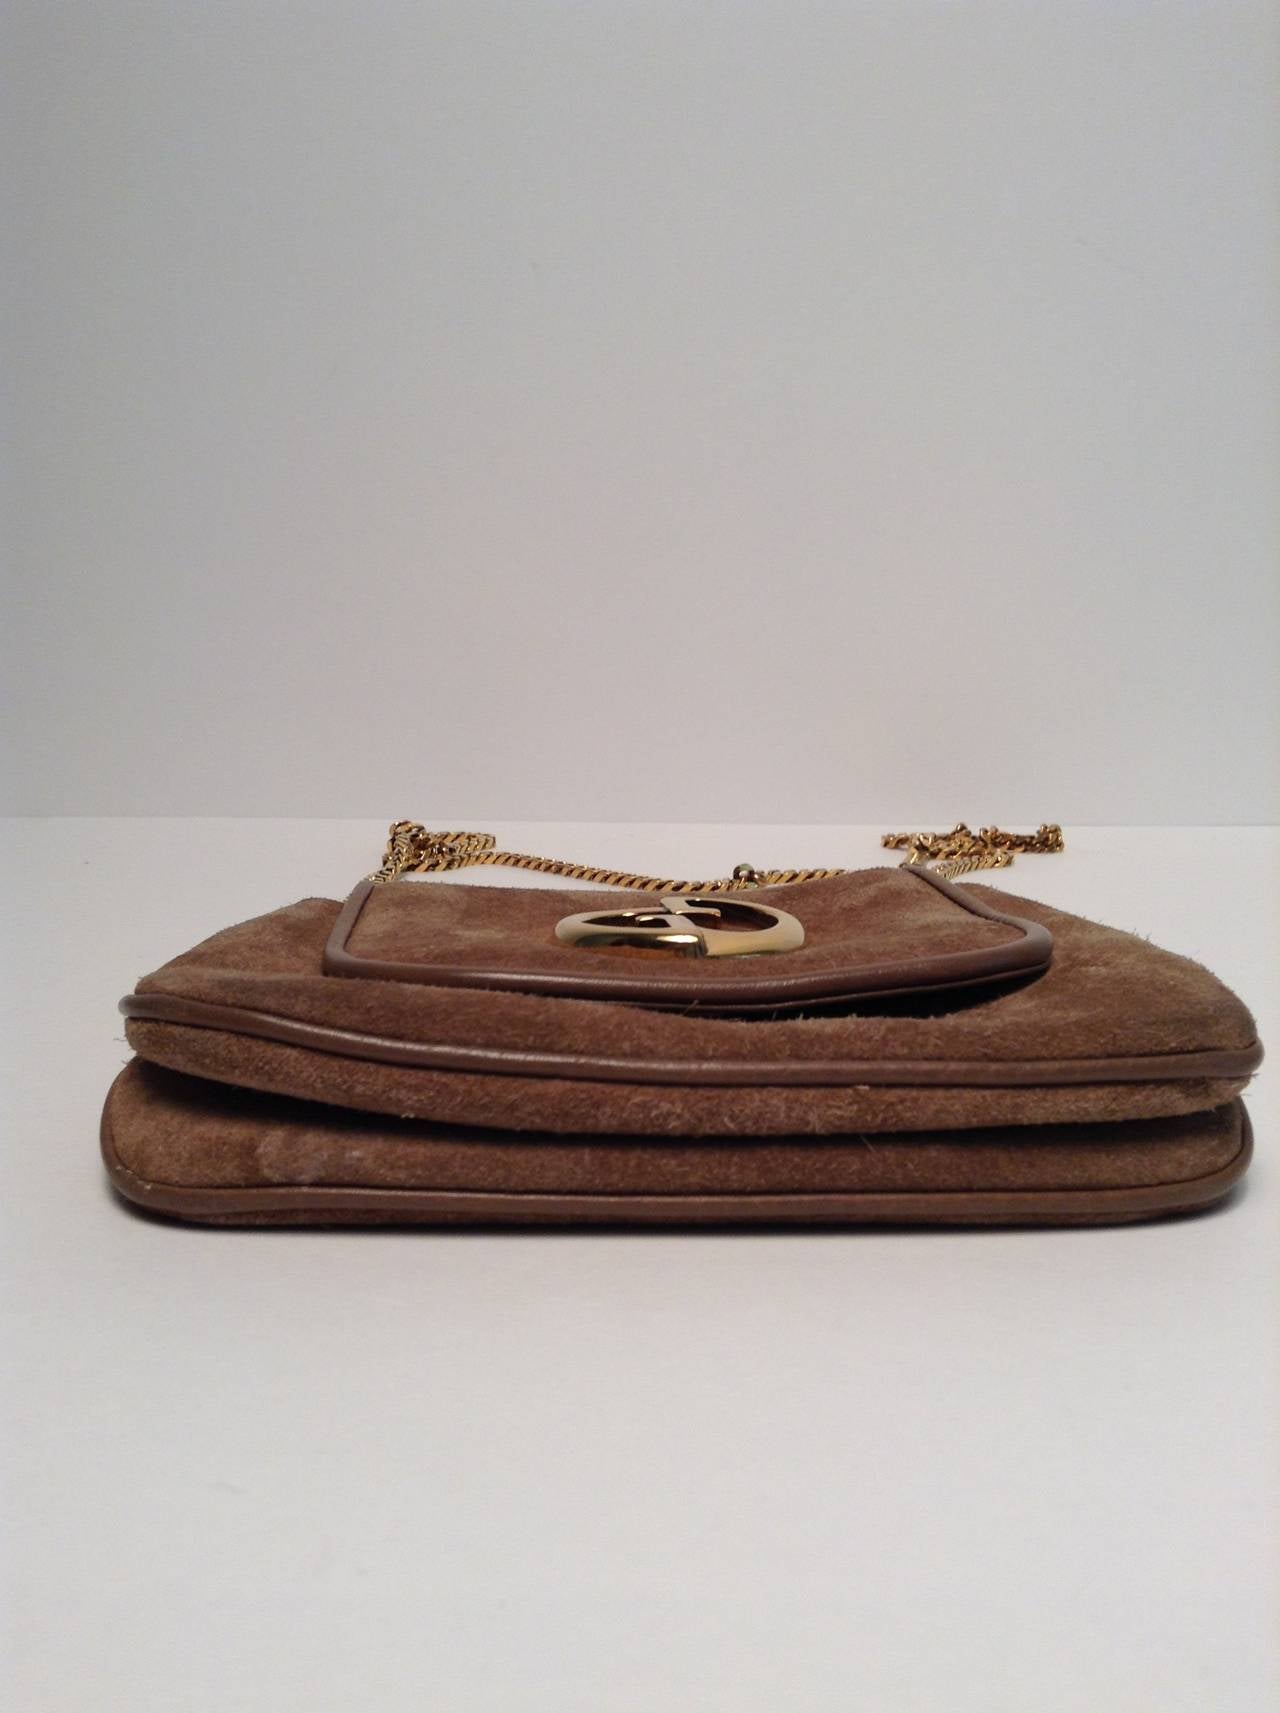 Gucci Taupe Suede Gold Chain Bag 1973 Reissue 2